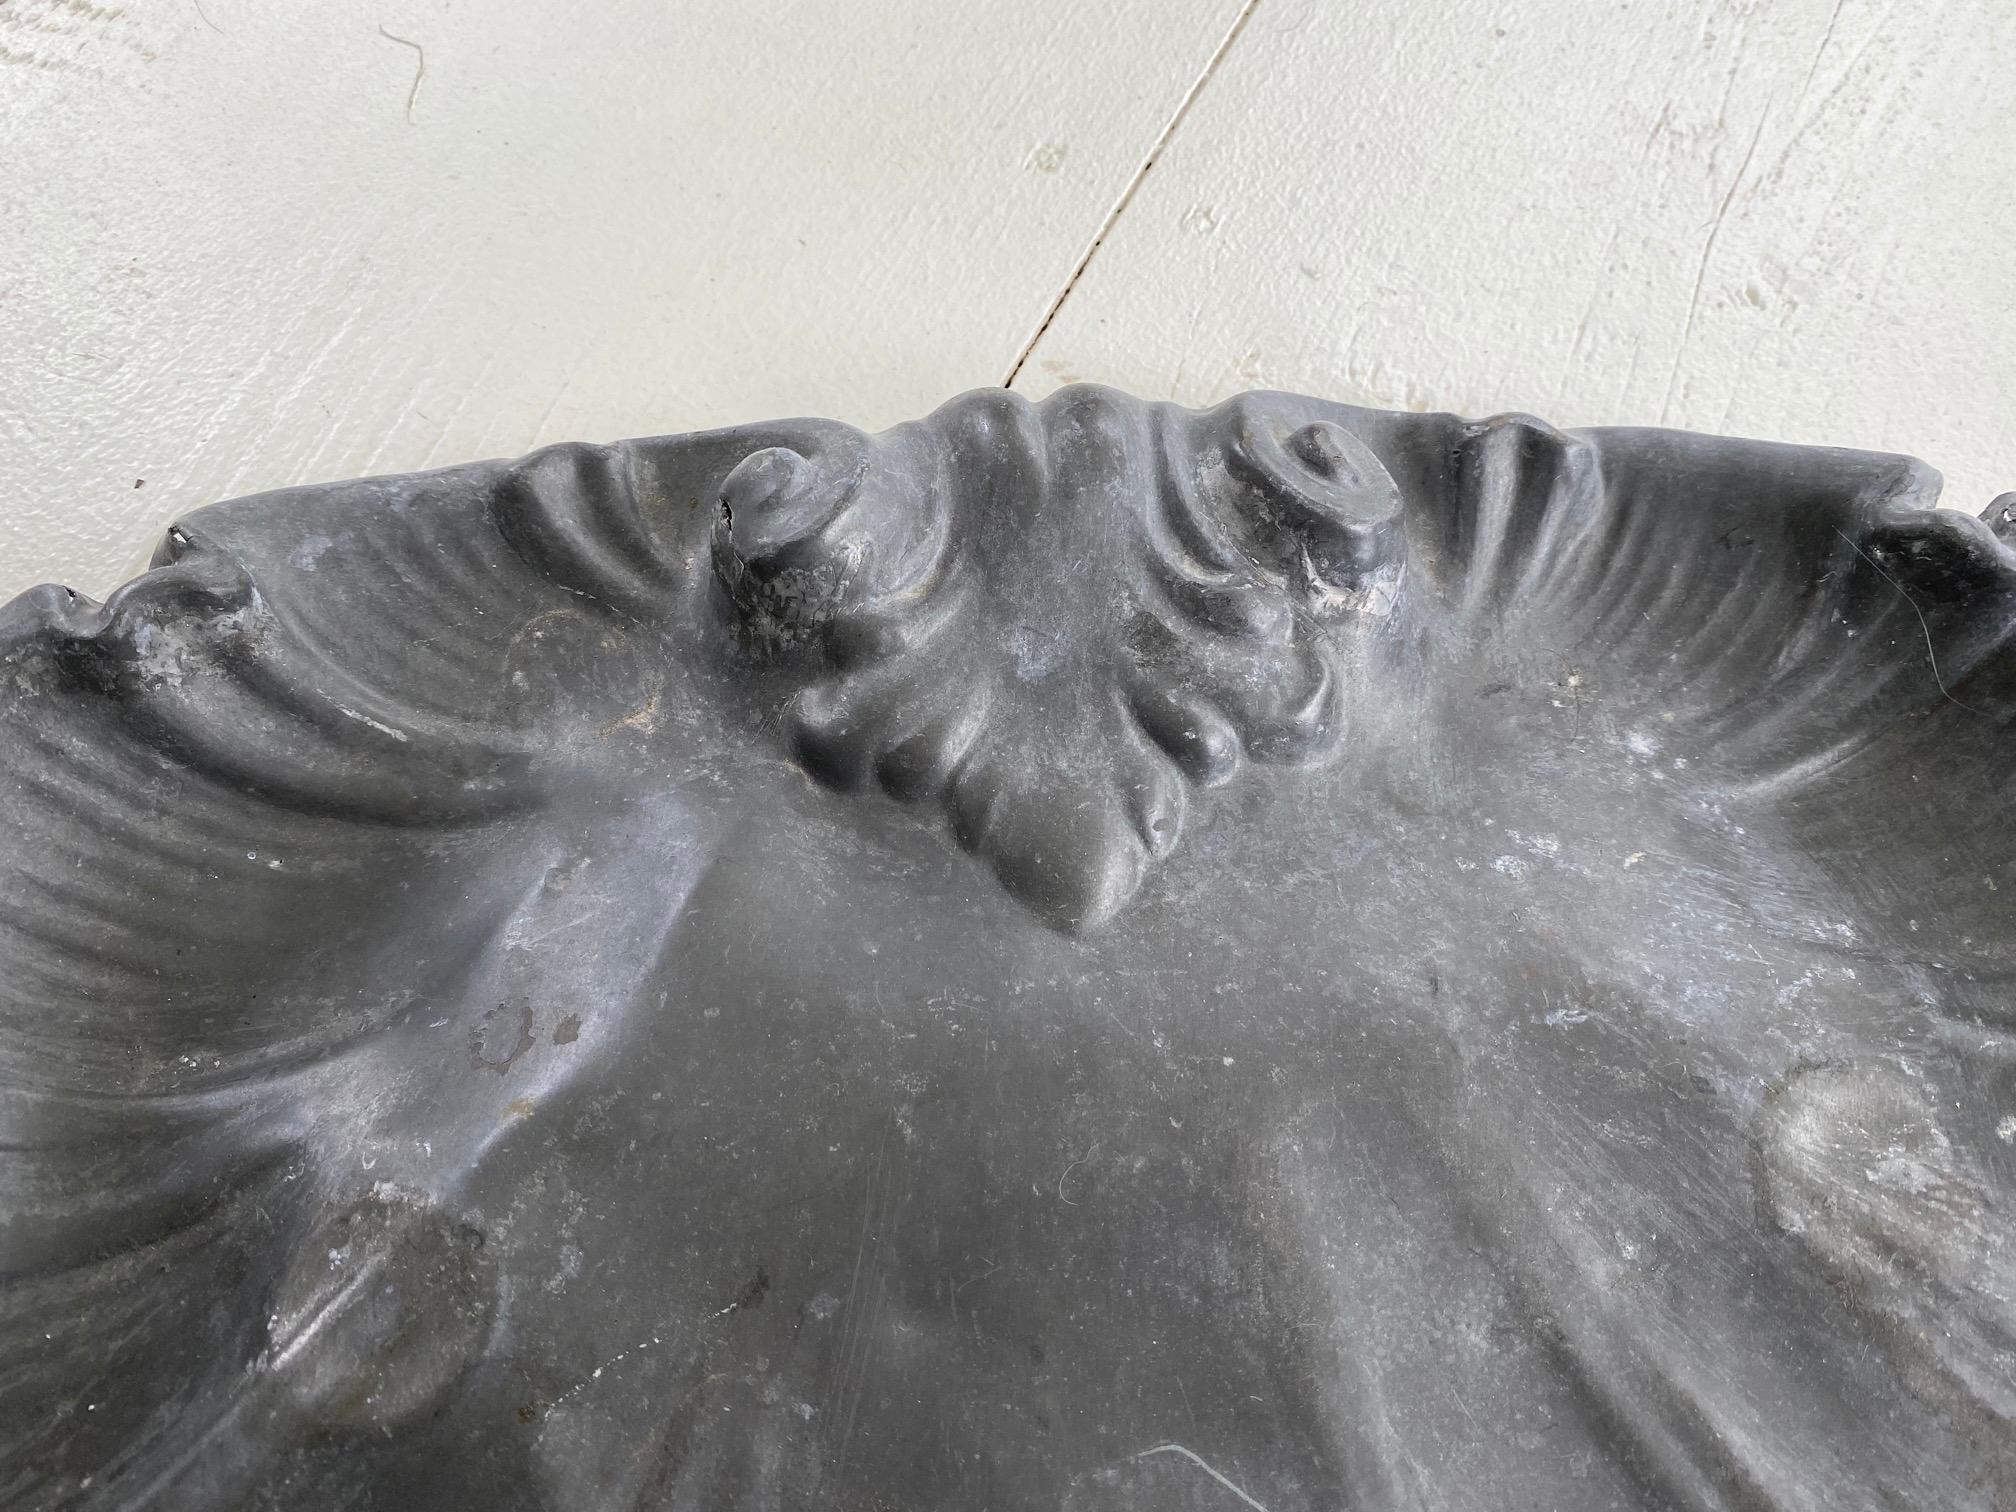 Unusual rustic French antique metal shell plate is made of metal with leaded color coating, a wonderful aged patina. The piece was possibly used in a commercial setting at a coach stop or a roadside inn but can now be used as centerpiece, decorative